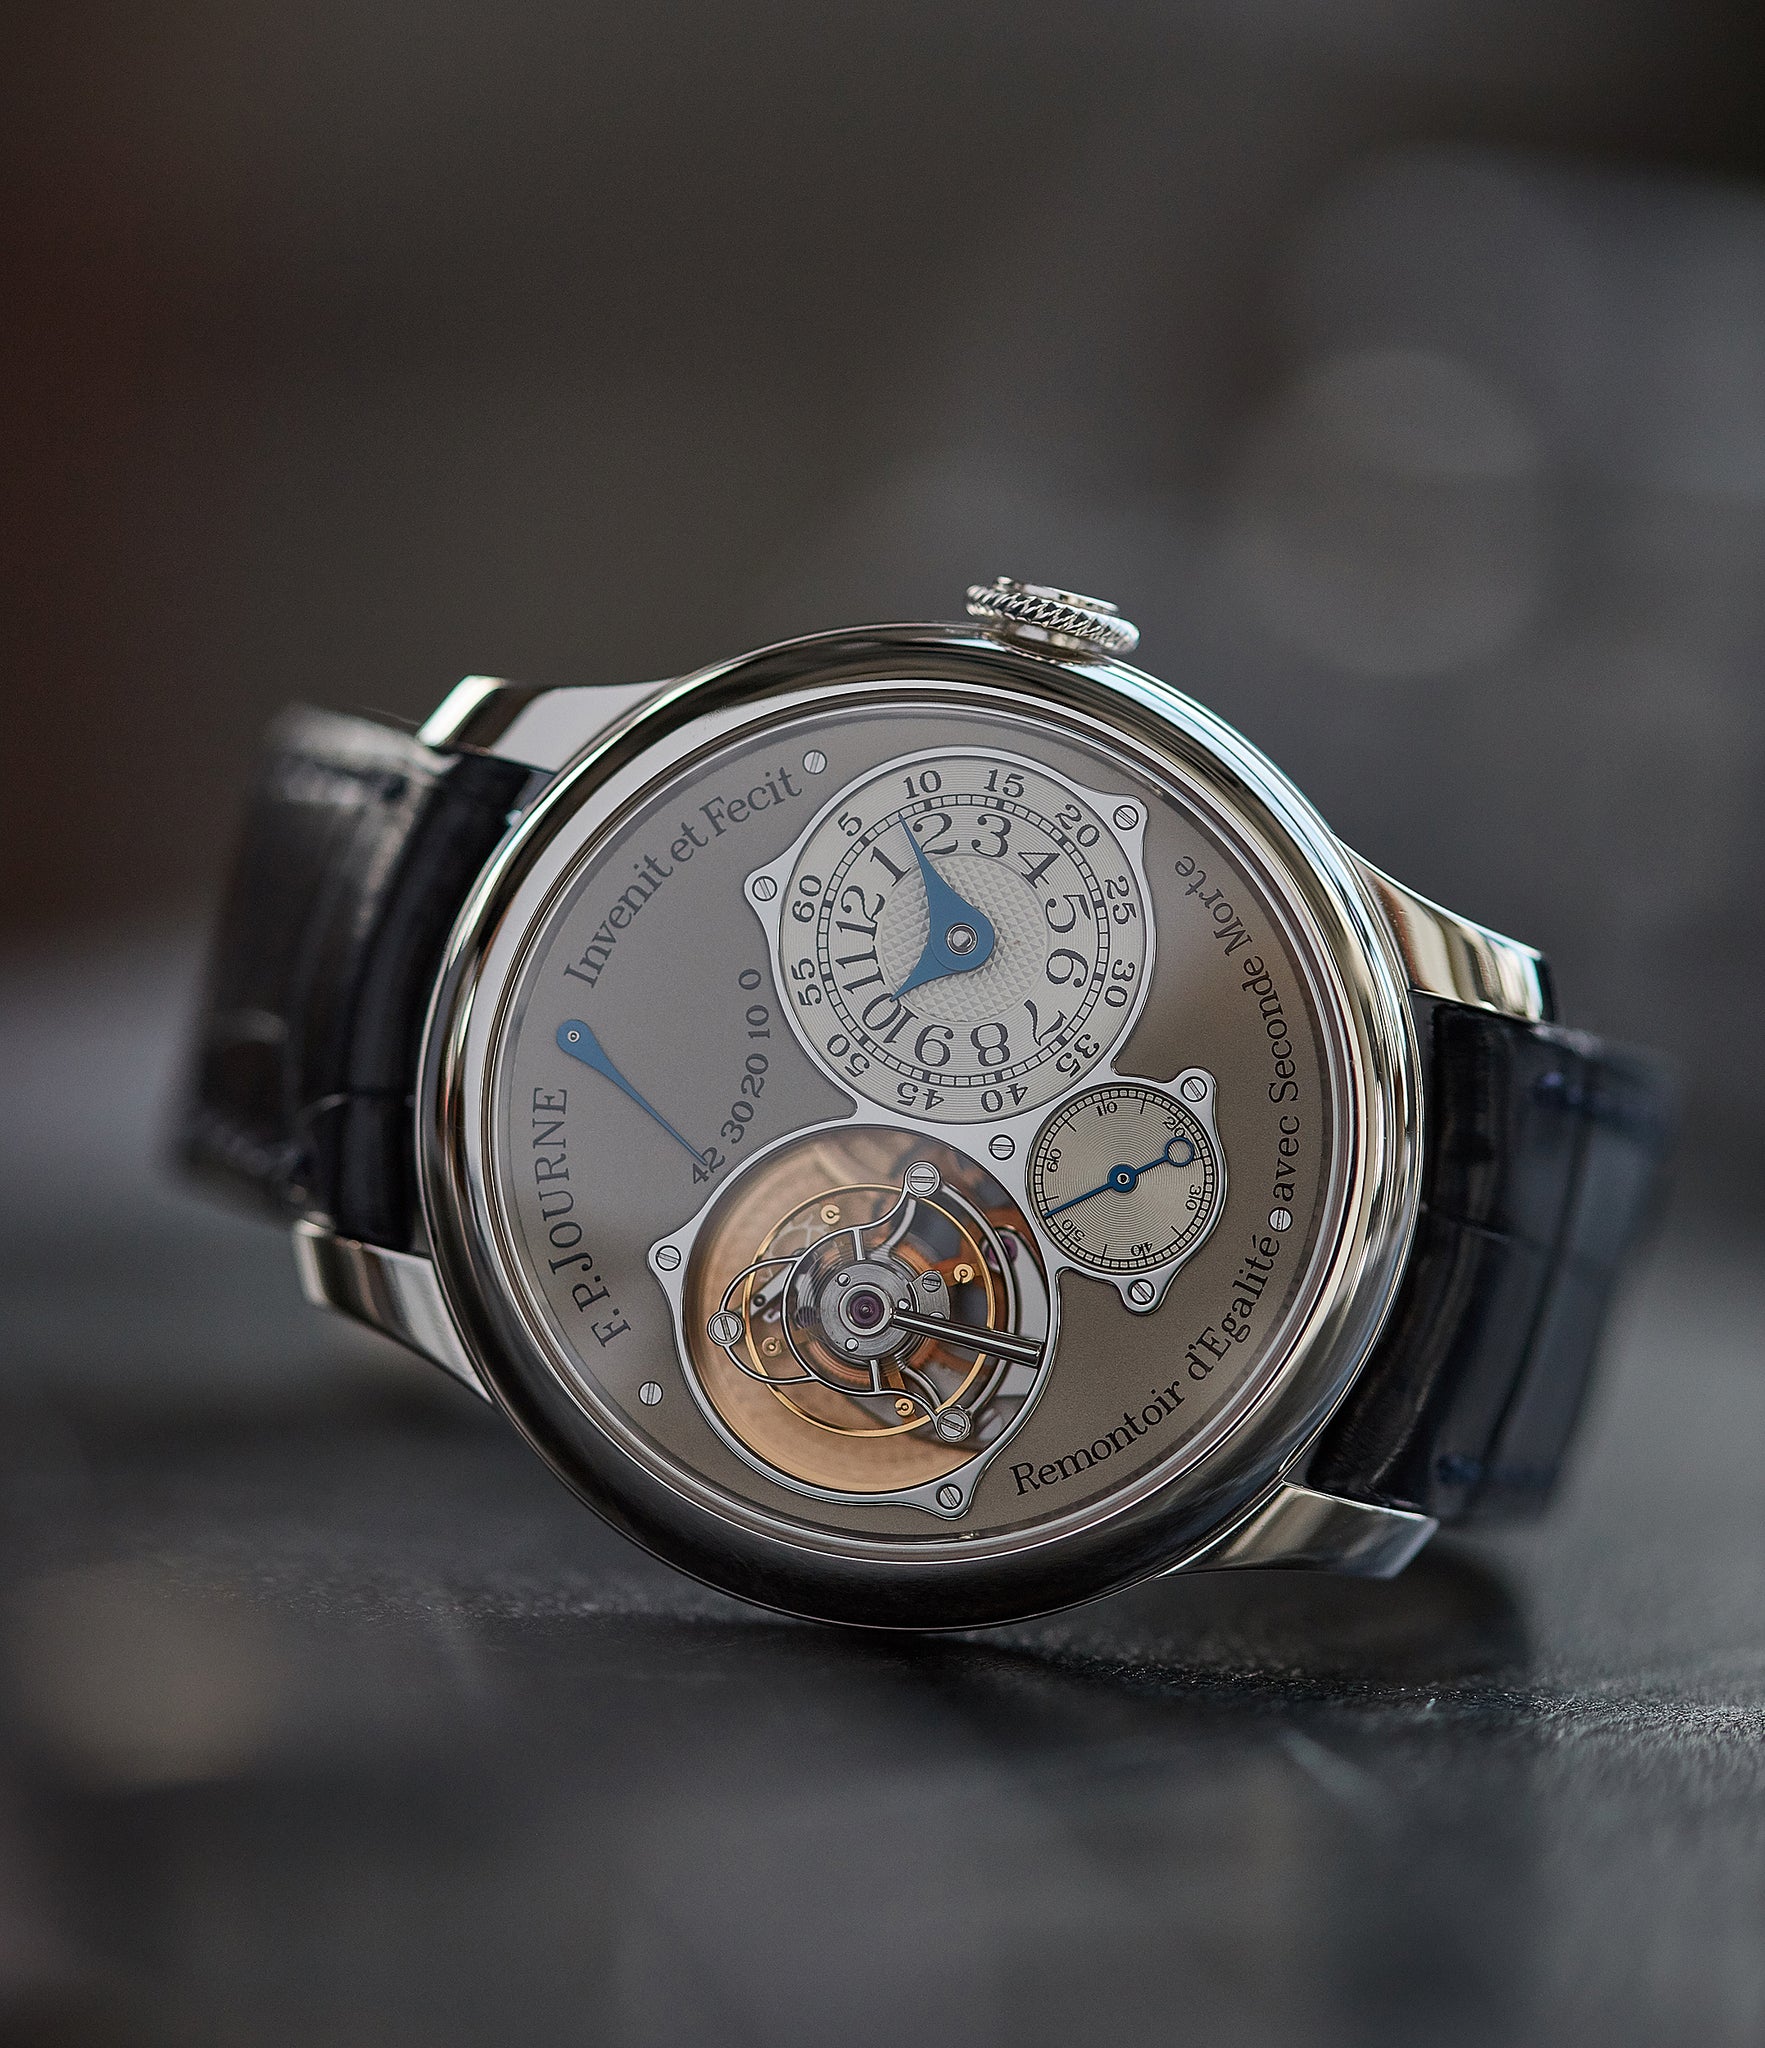 pre-owned F. P. Journe Tourbillon Souverain TN dead-beat seconds 40mm platinum watch for sale online at A Collected Man London UK specialist of rare watches